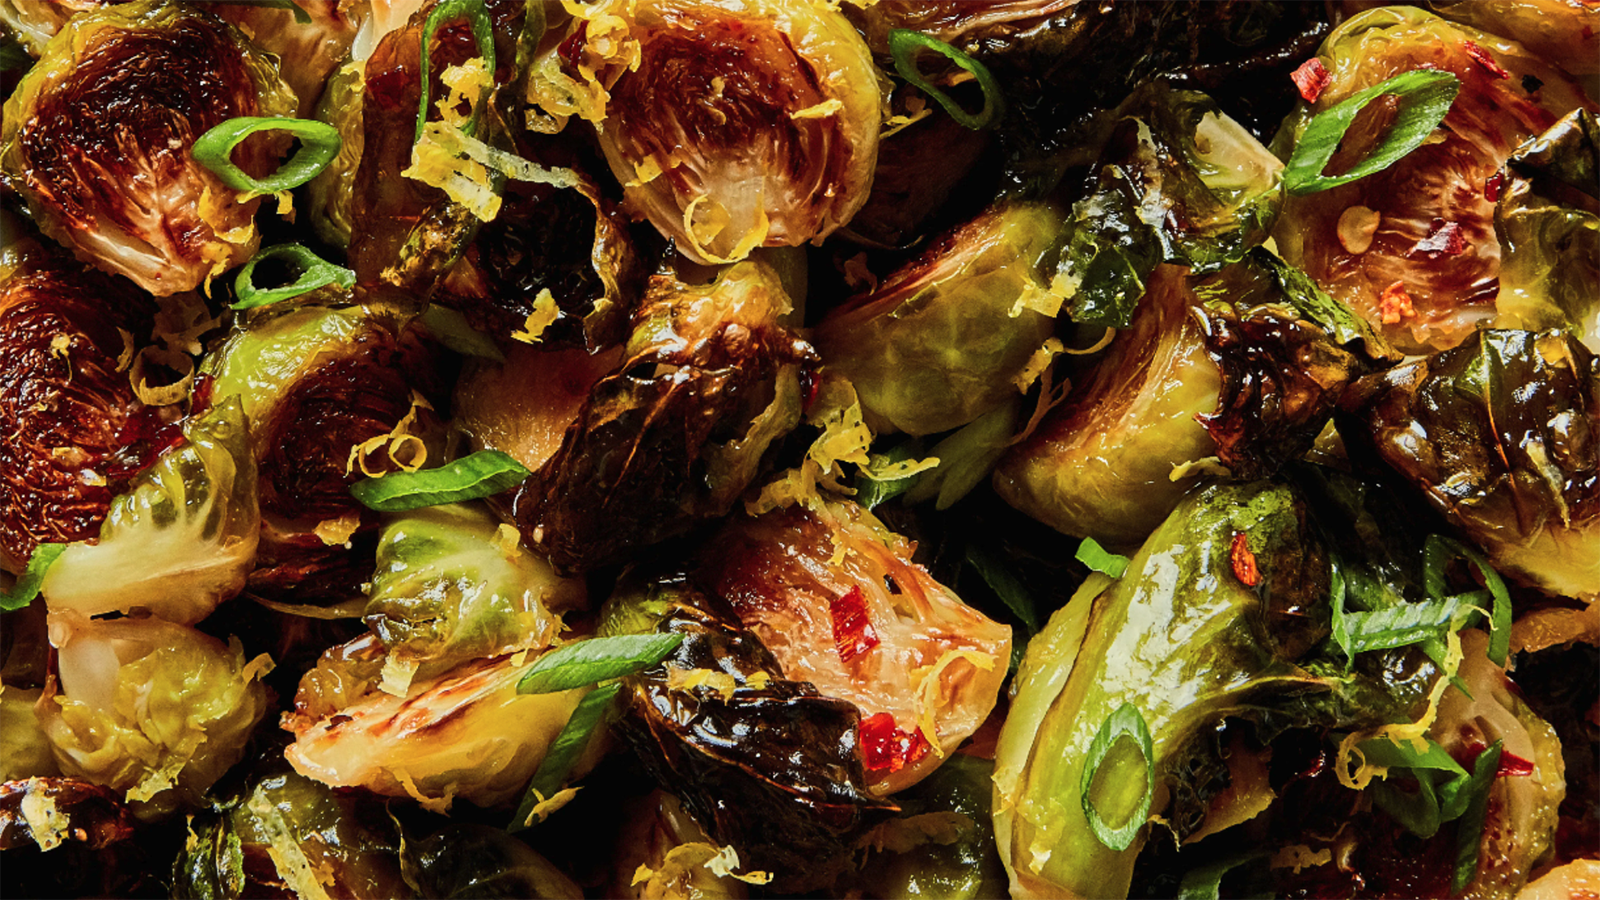 Frazie's Meat & Market | frazies homemade brussel sprouts